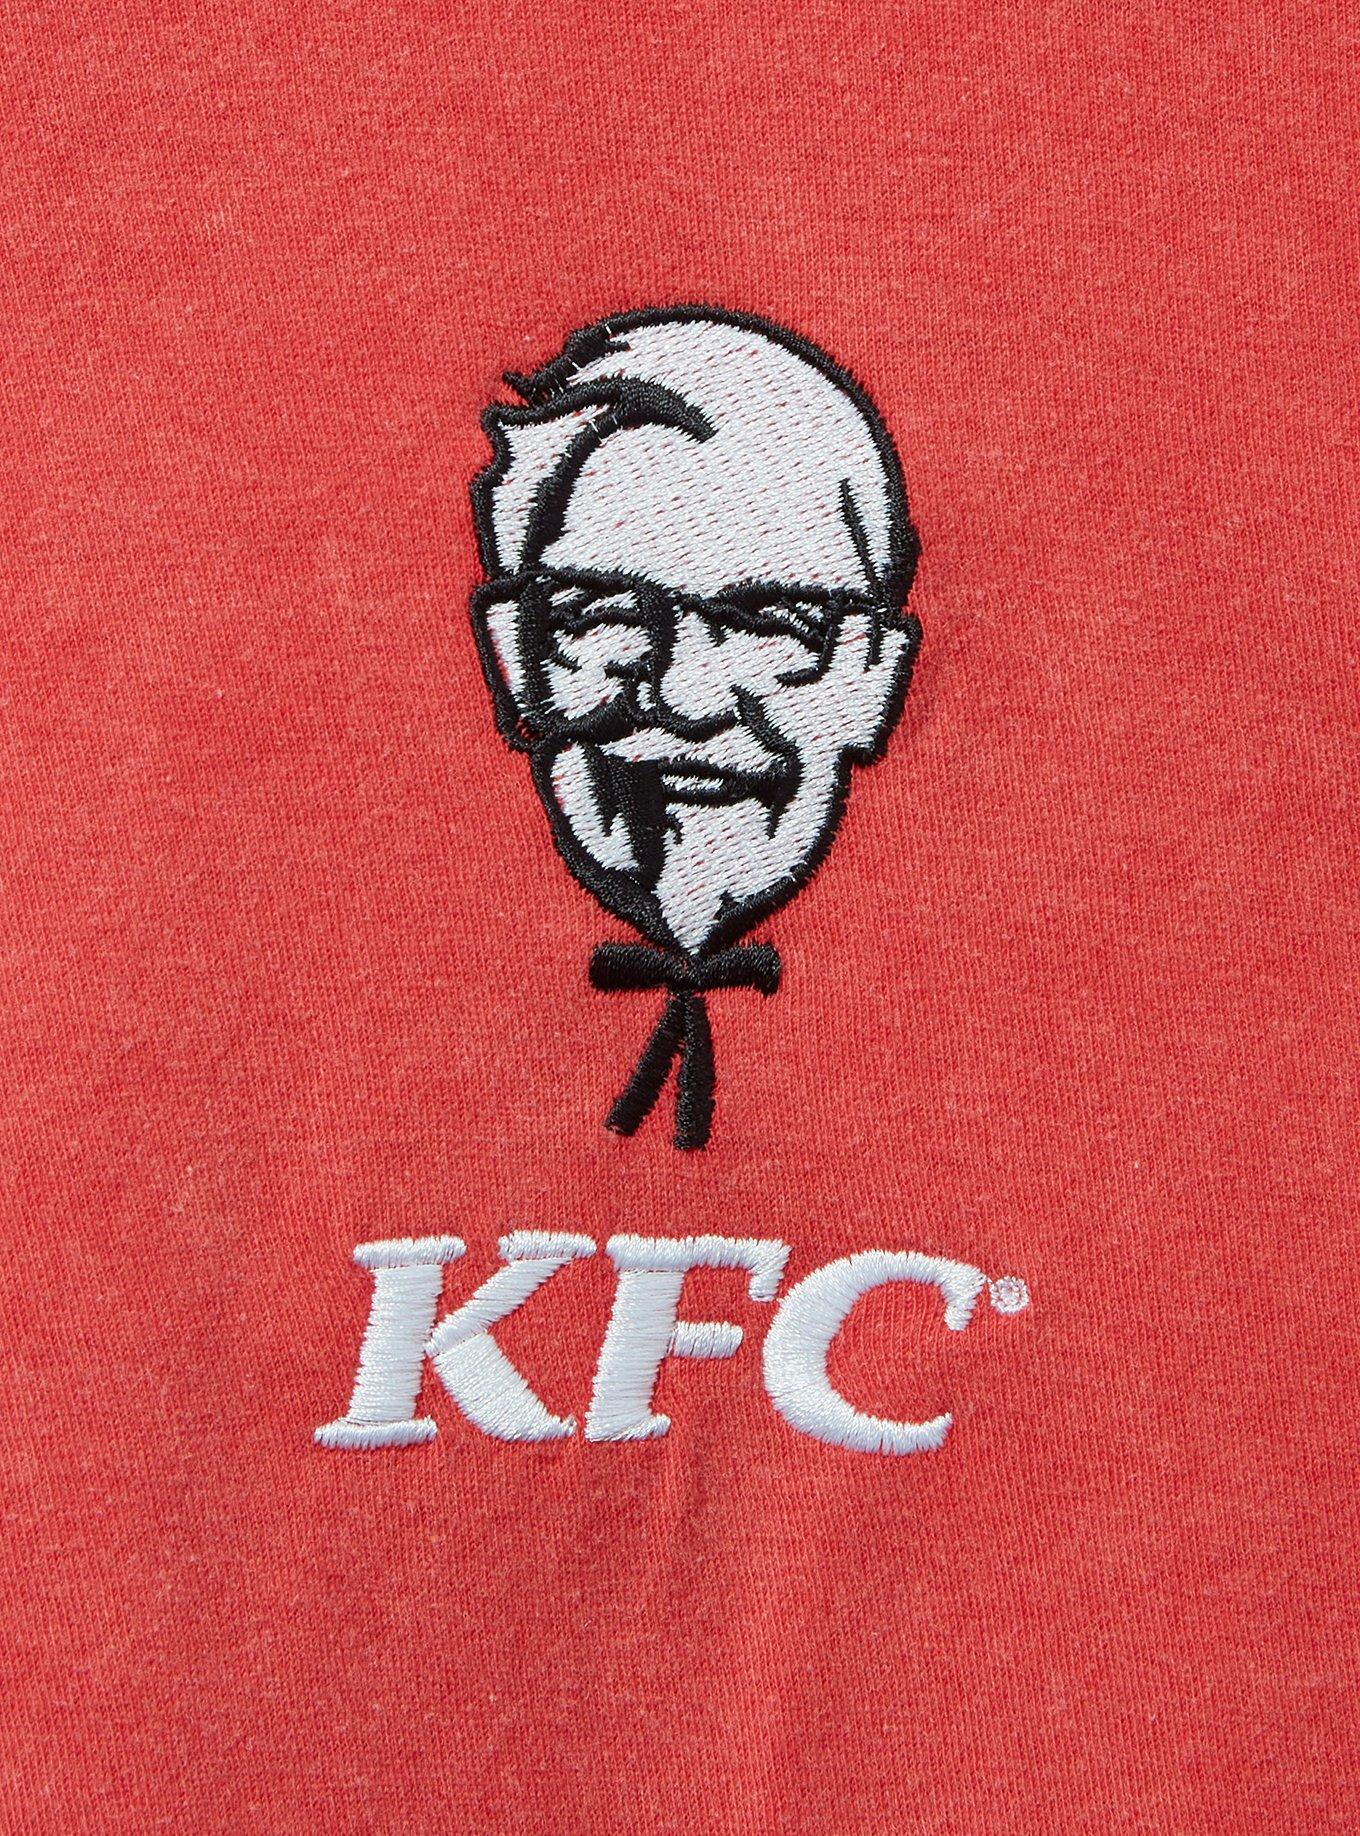 KFC Colonel Sanders Embroidered Portrait T-Shirt - BoxLunch Exclusive, , hi-res